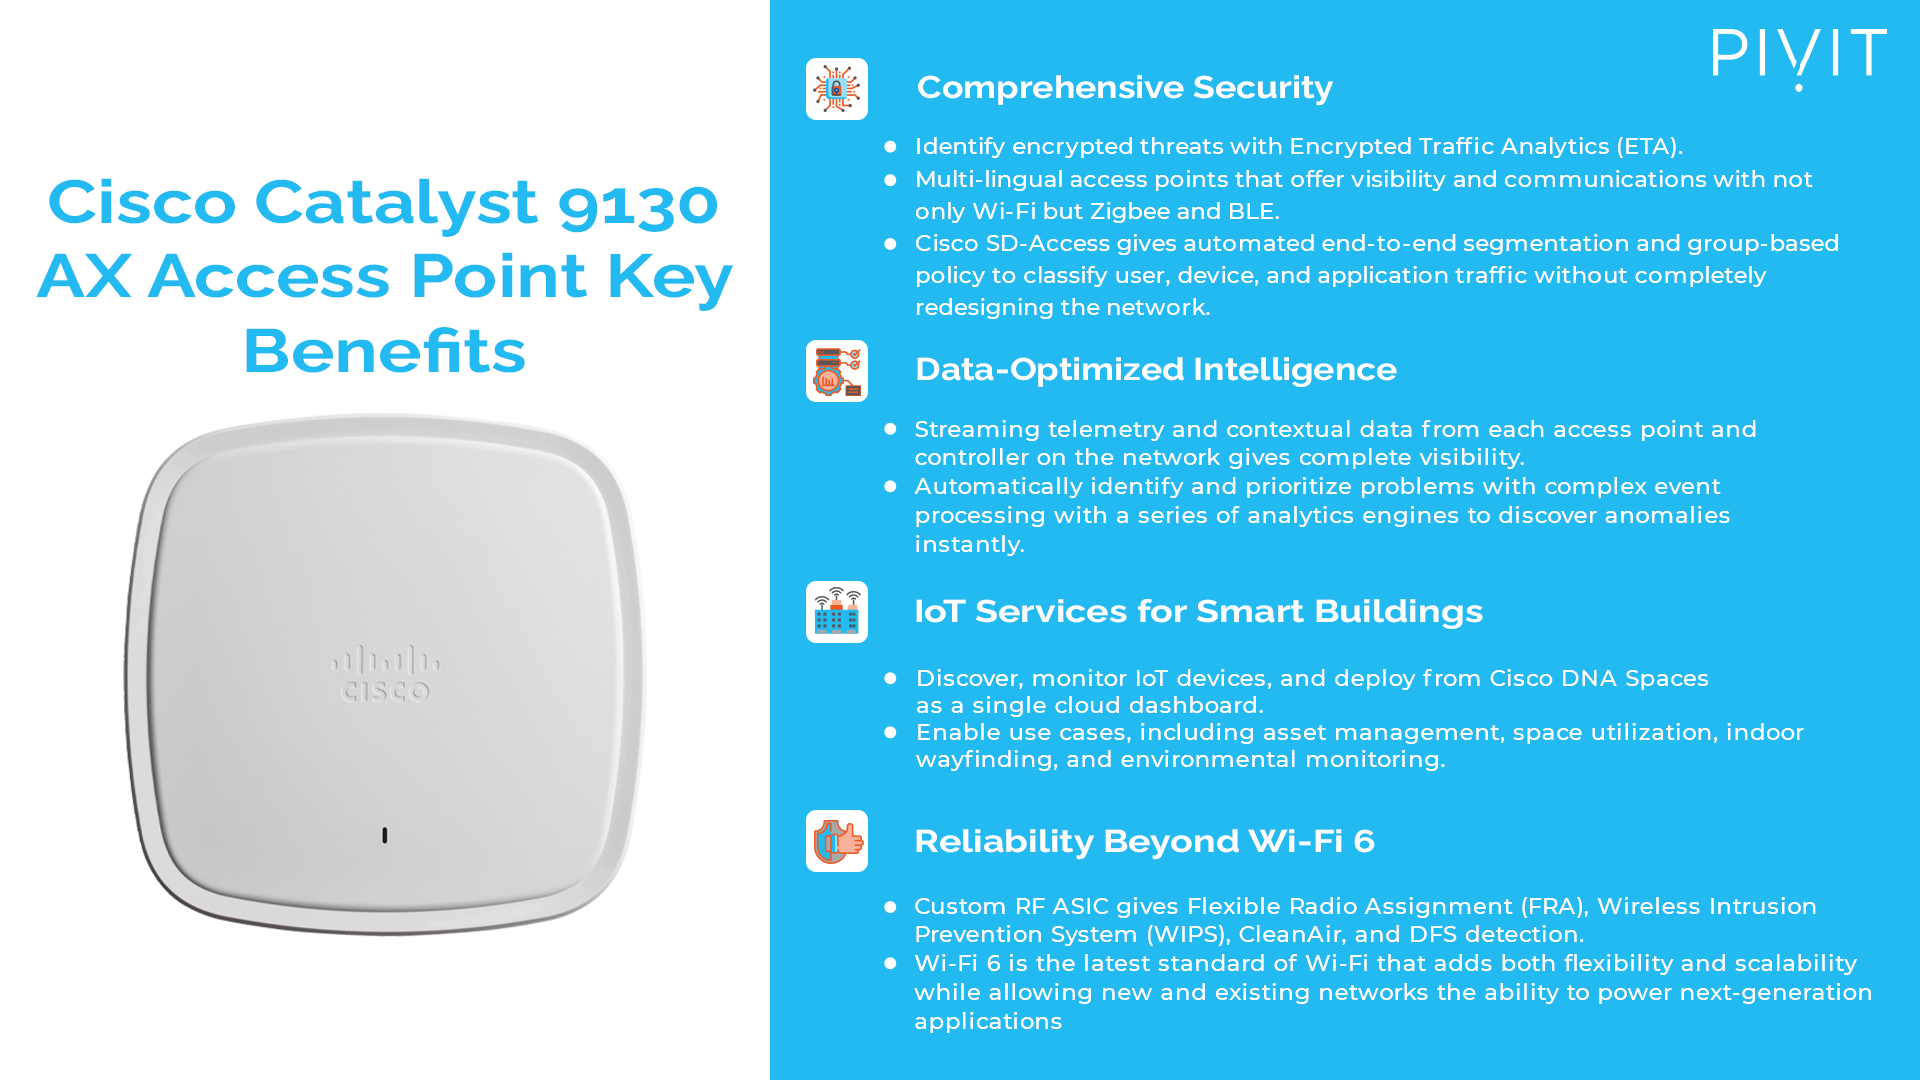 Cisco Catalyst 9130AX access point main features and benefits list